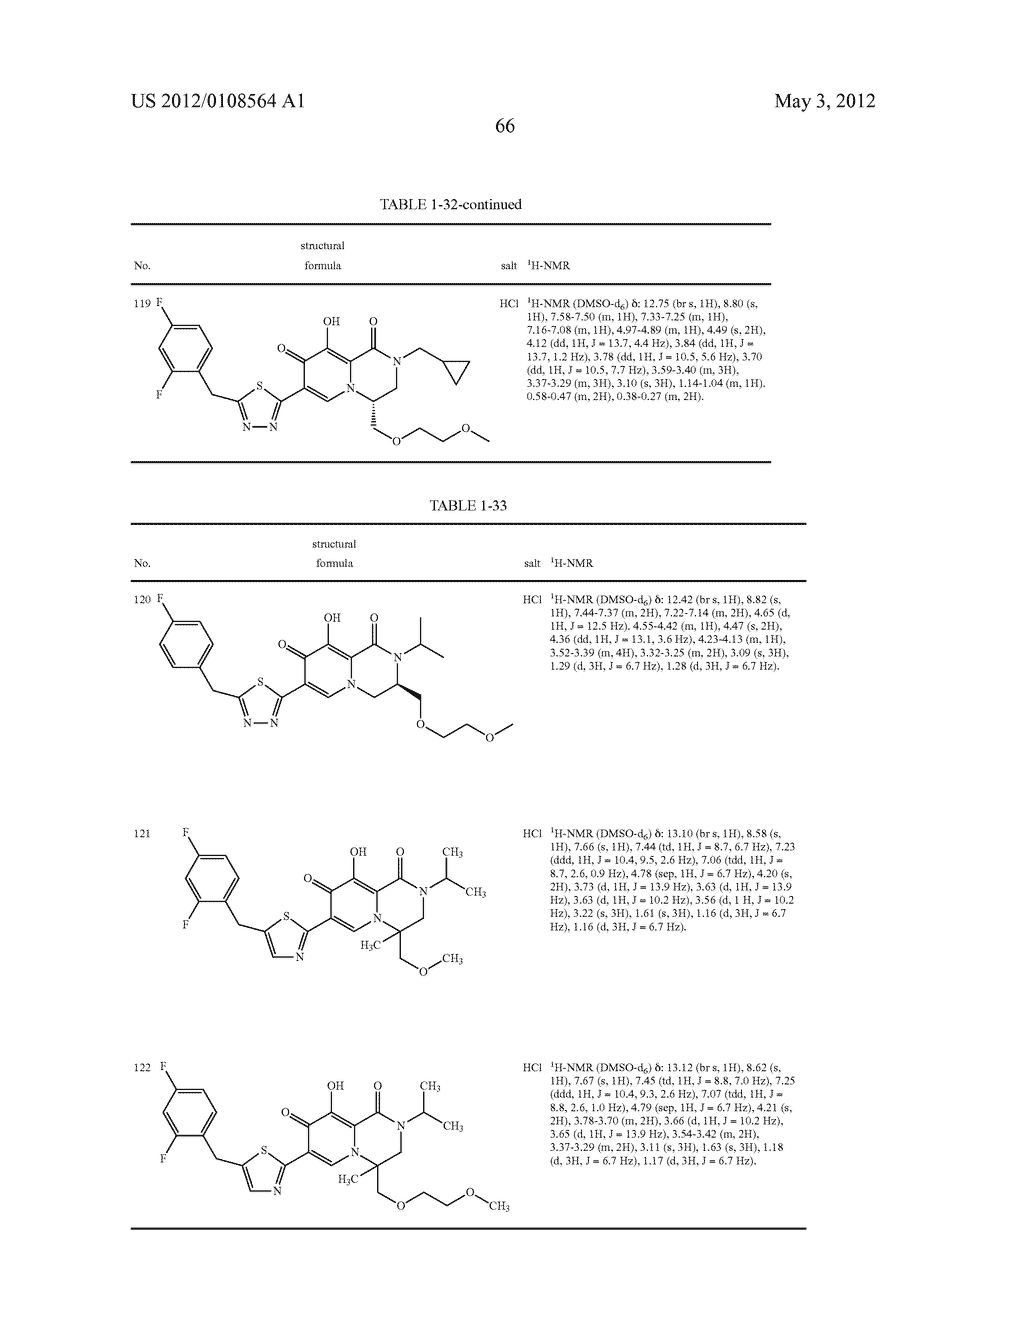 1,3,4,8-Tetrahydro-2H-Pyrido[1,2-a]Pyradine Derivatives and Use Thereof as     HIV Integrase Inhibitor - diagram, schematic, and image 67